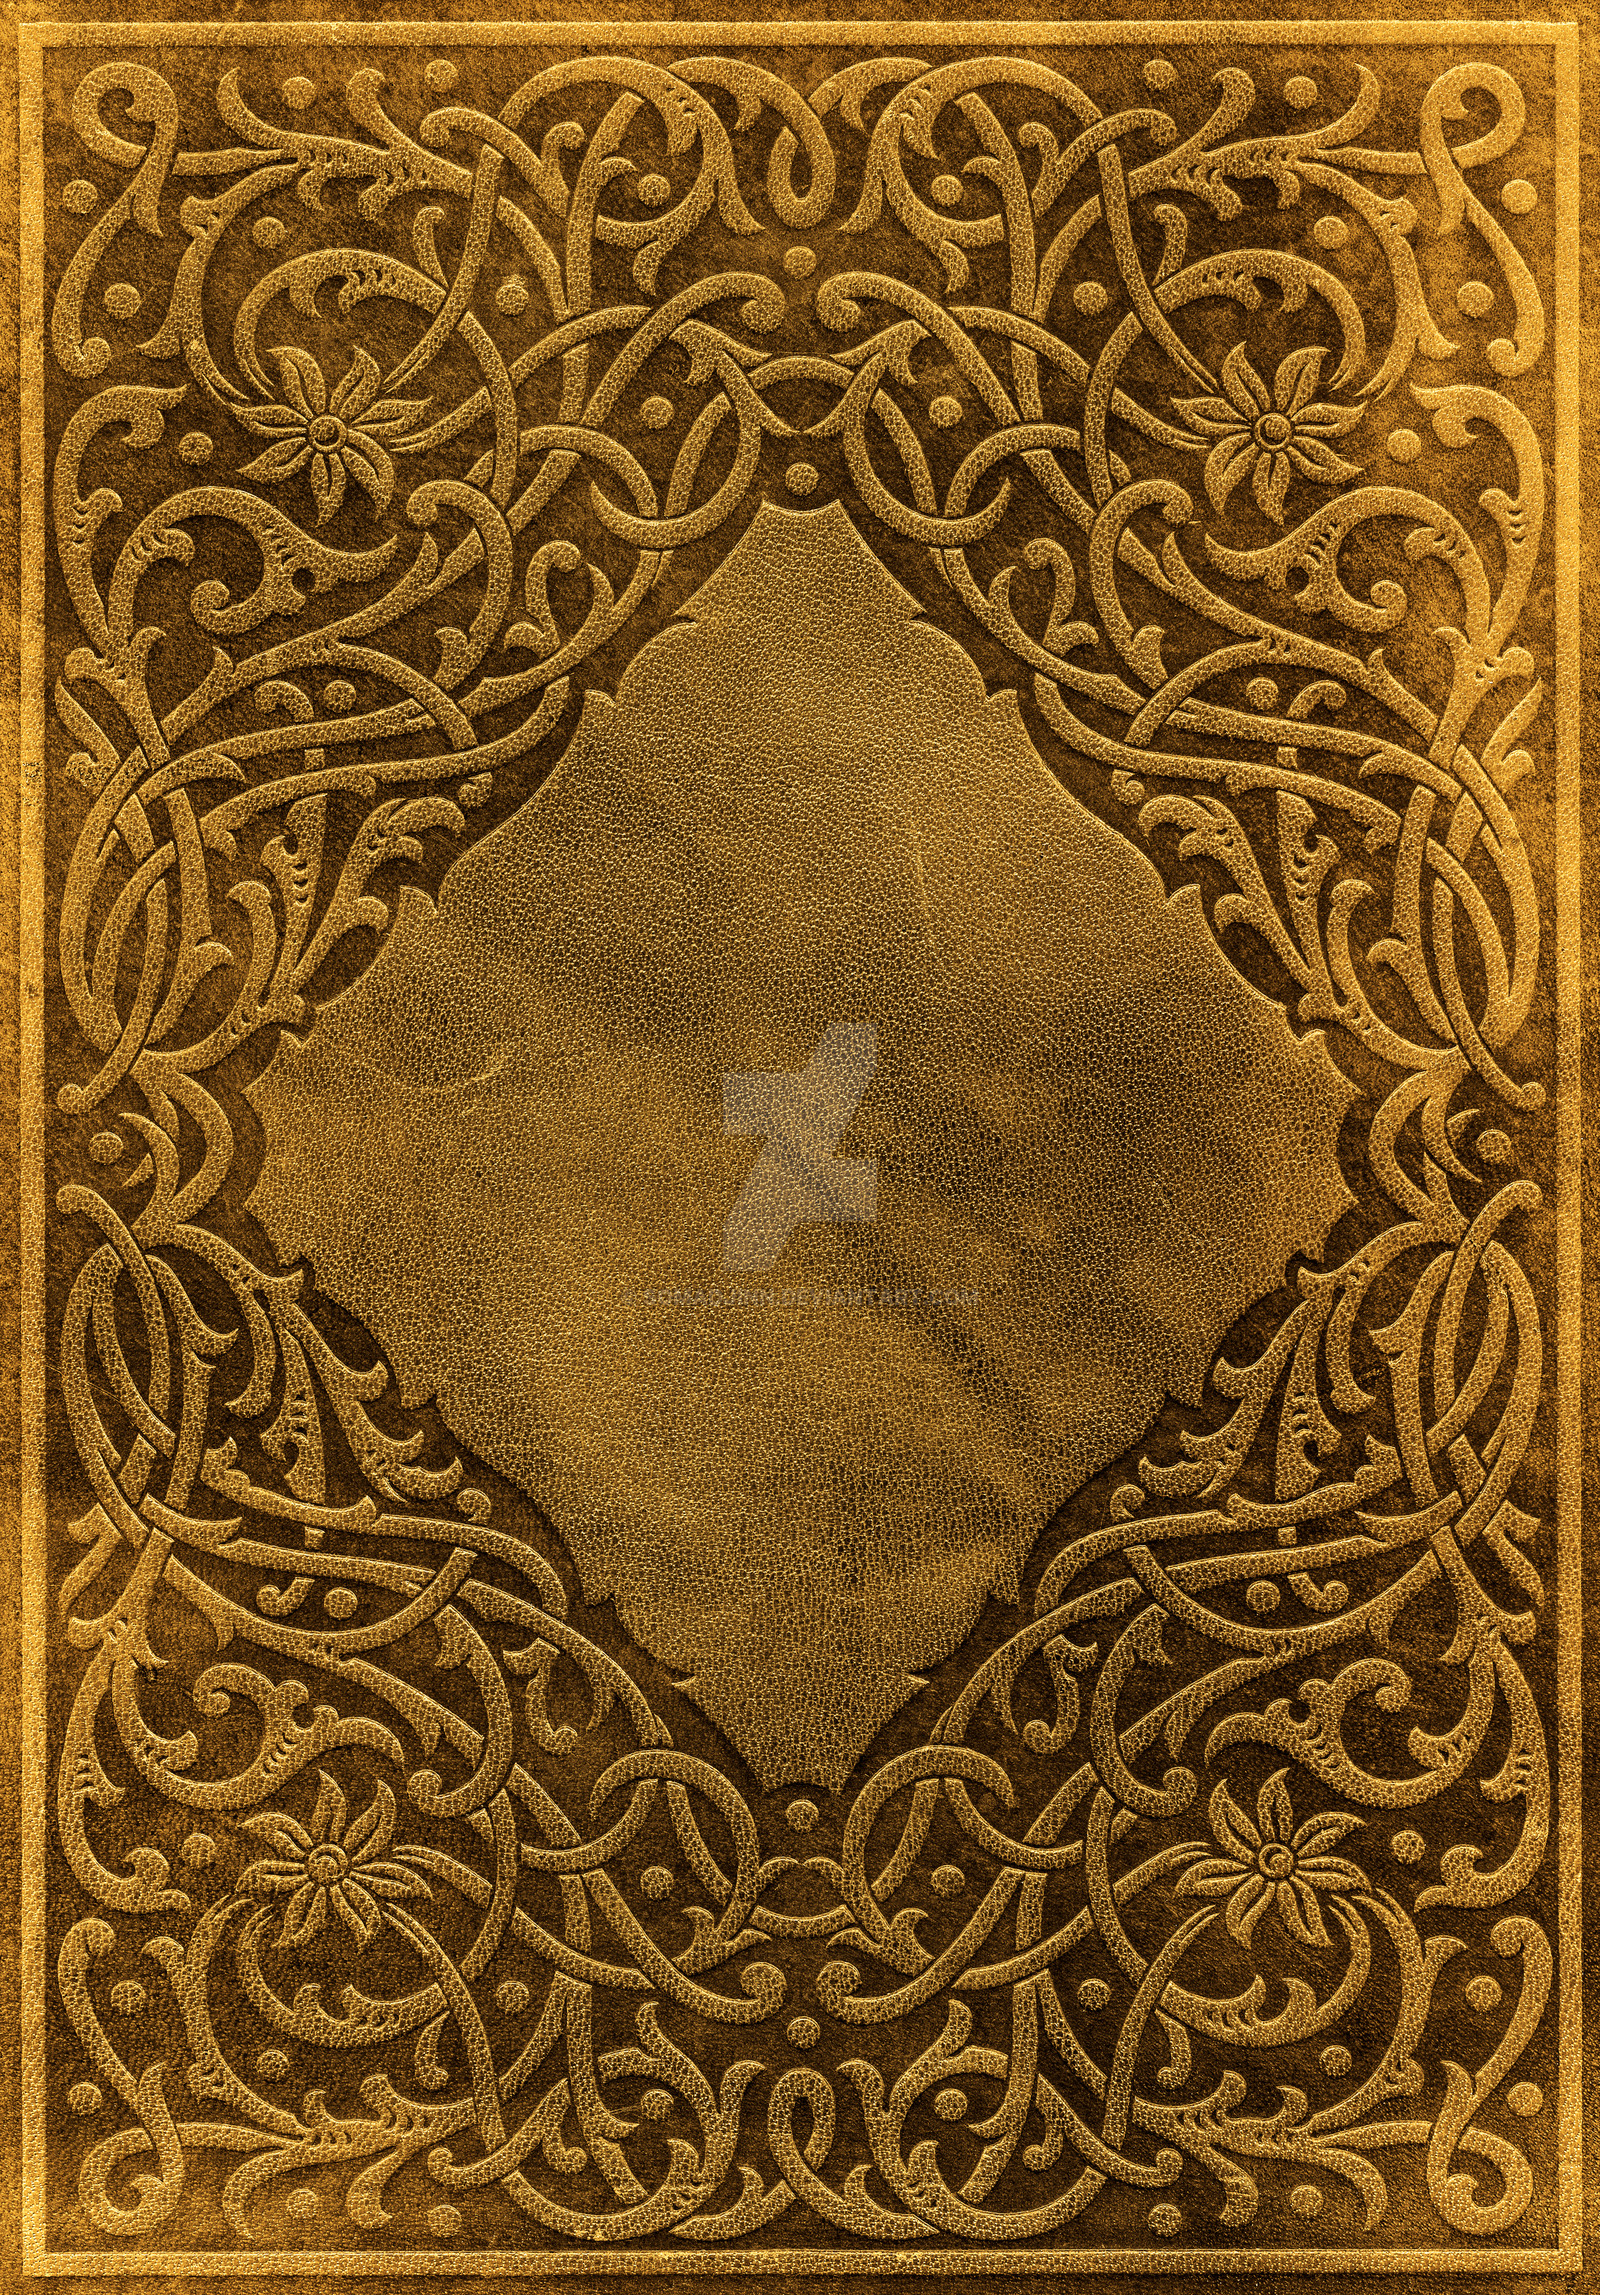 Free photo: Vintage Book Cover Book Cover Freetexturefrida Free